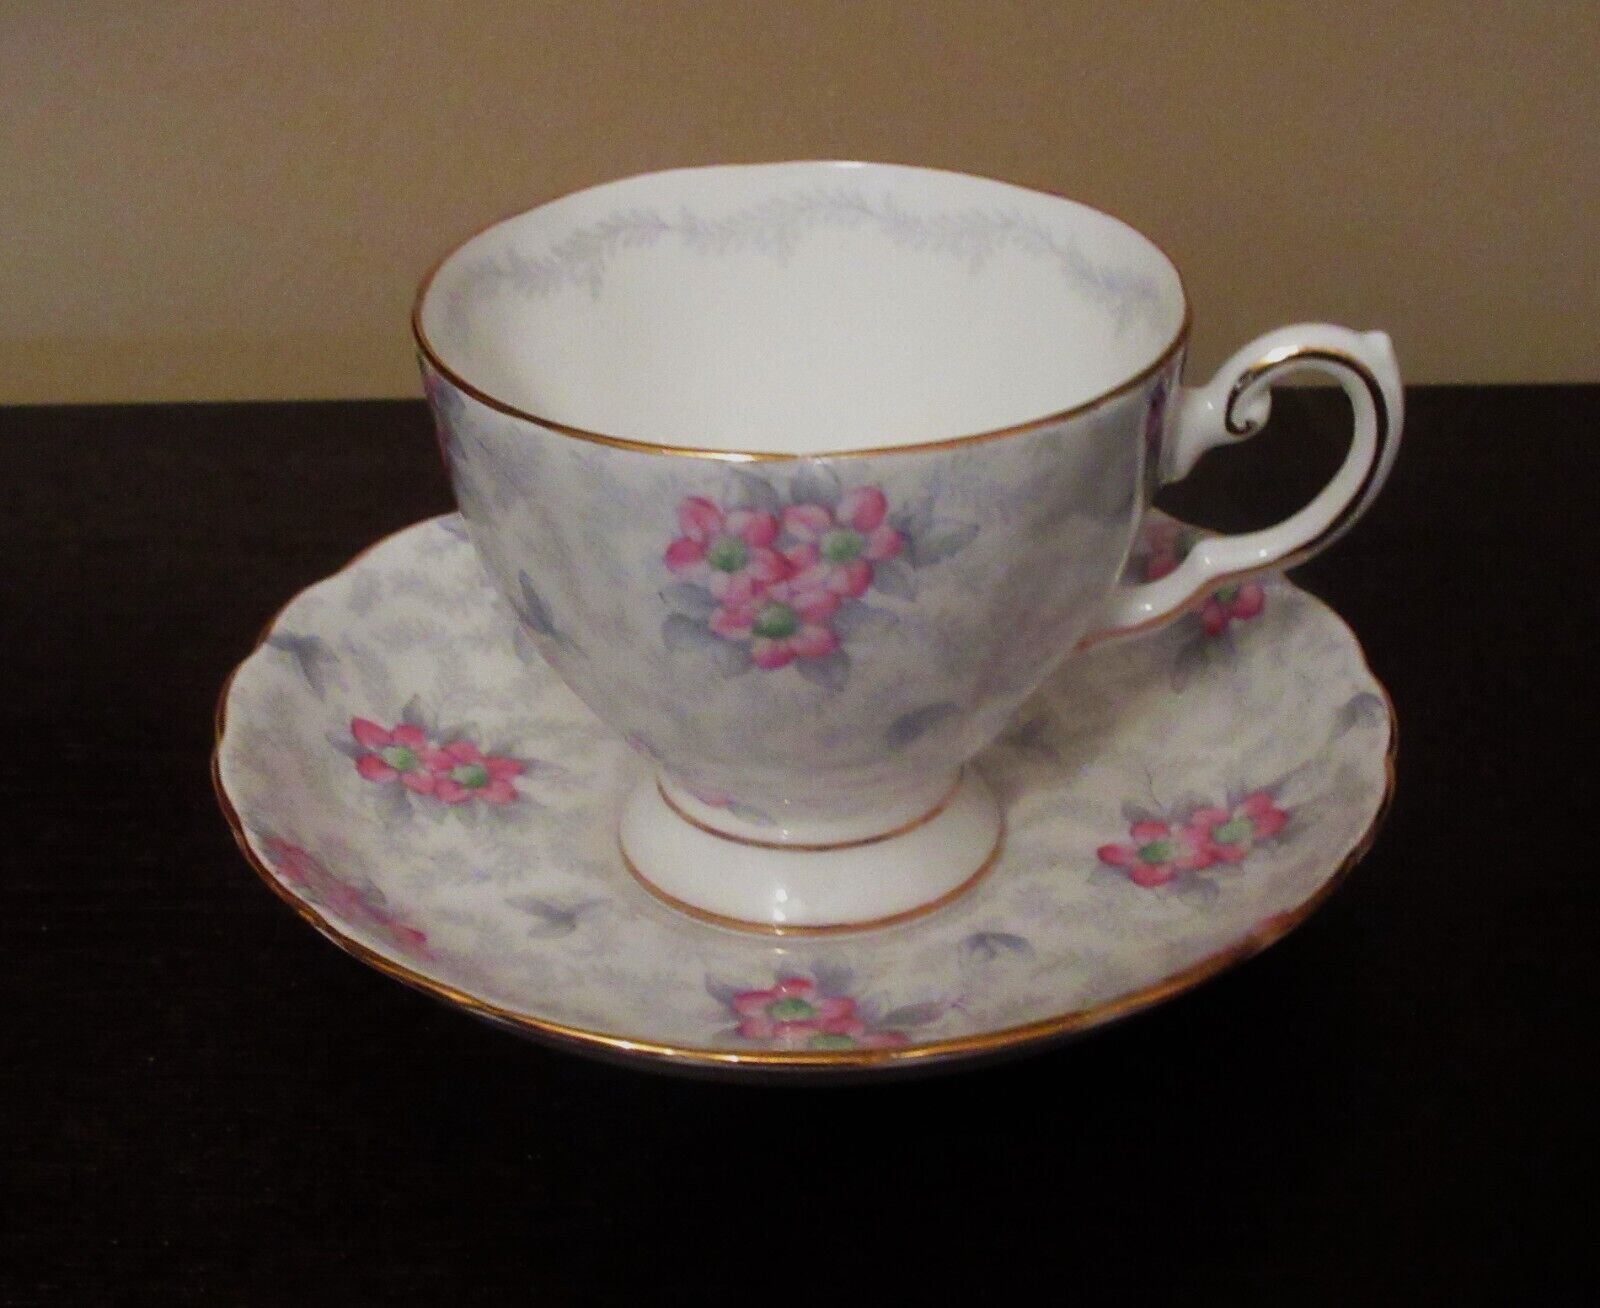 Tuscan Fine English Bone China Tea Cup and Saucer Pink Flowers with Gray Vines